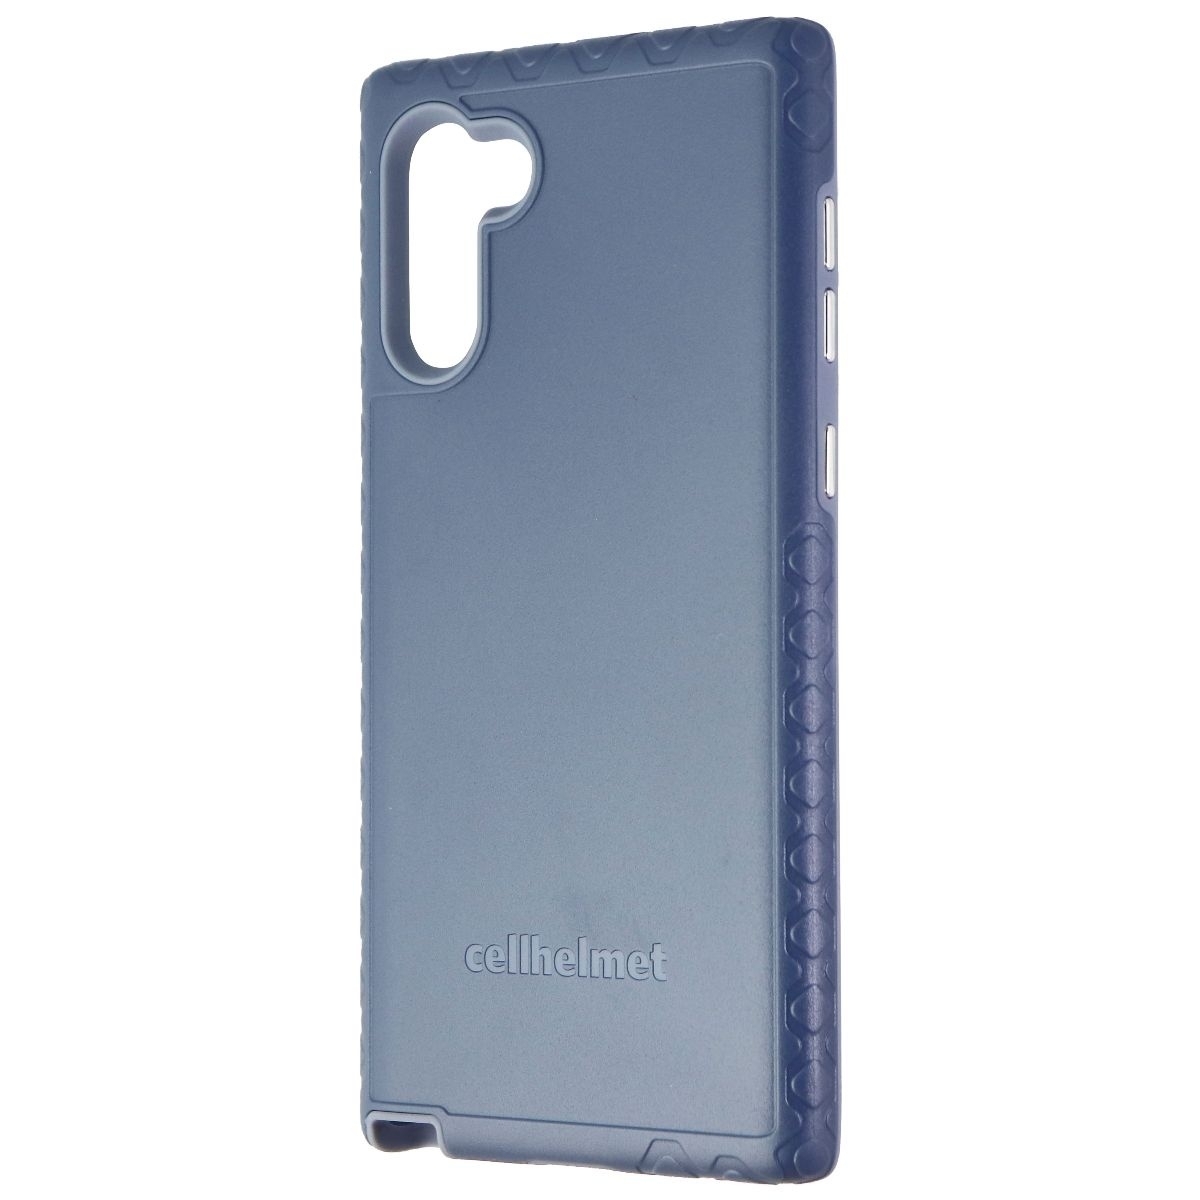 CellHelmet Fortitude Series Case For Samsung Galaxy Note 10 - Slate Blue